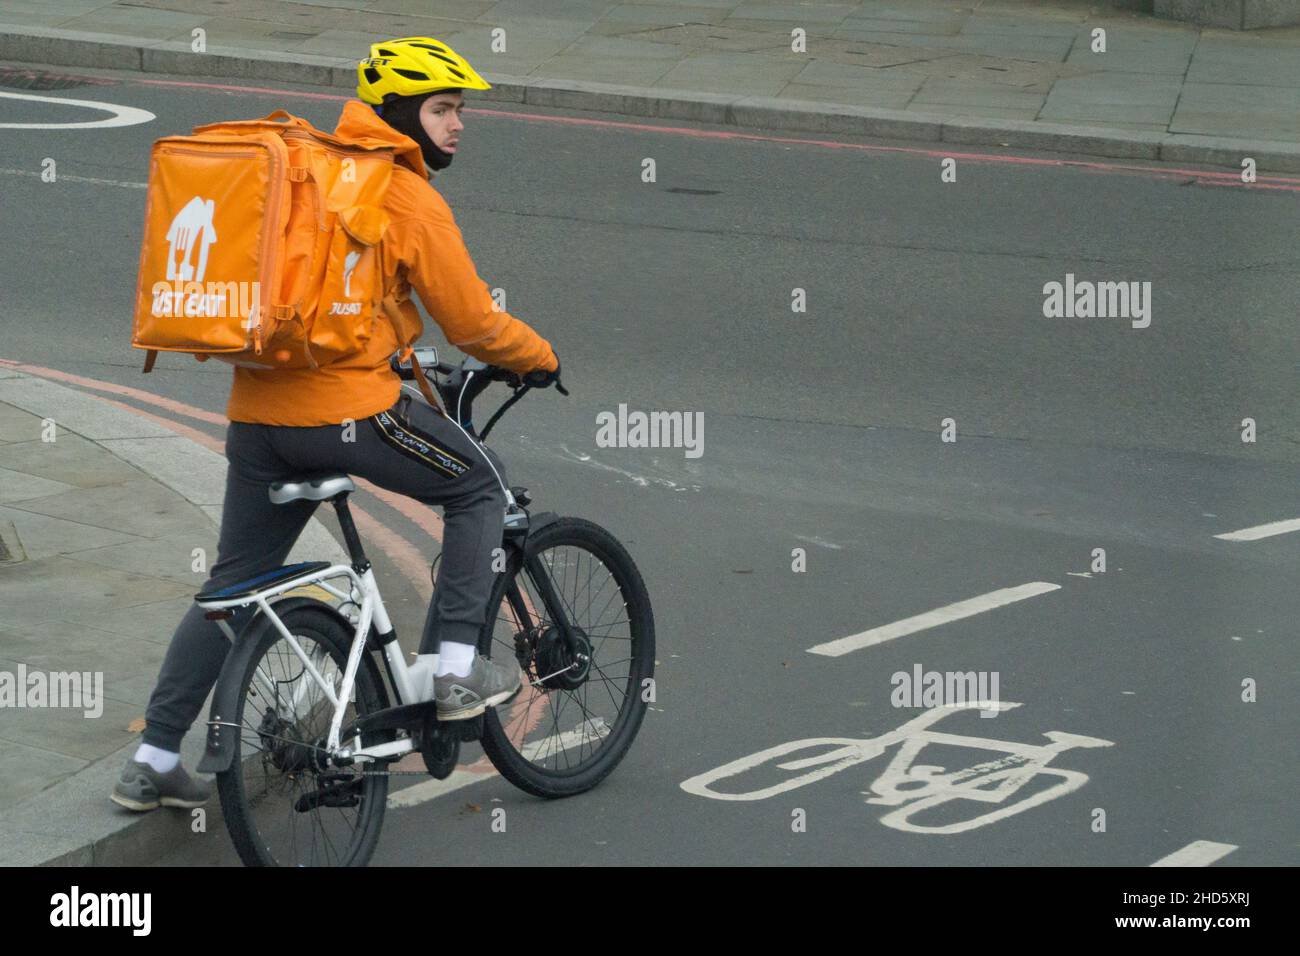 London, UK, 3 January 2022: A Just Eat delivery rider on a bicycle waits in the cycle lane at a junction. Along with Uber Eats and Deliveroo, delivering hot food to customers is a growth sector. Anna Watson/Alamy Live News Stock Photo